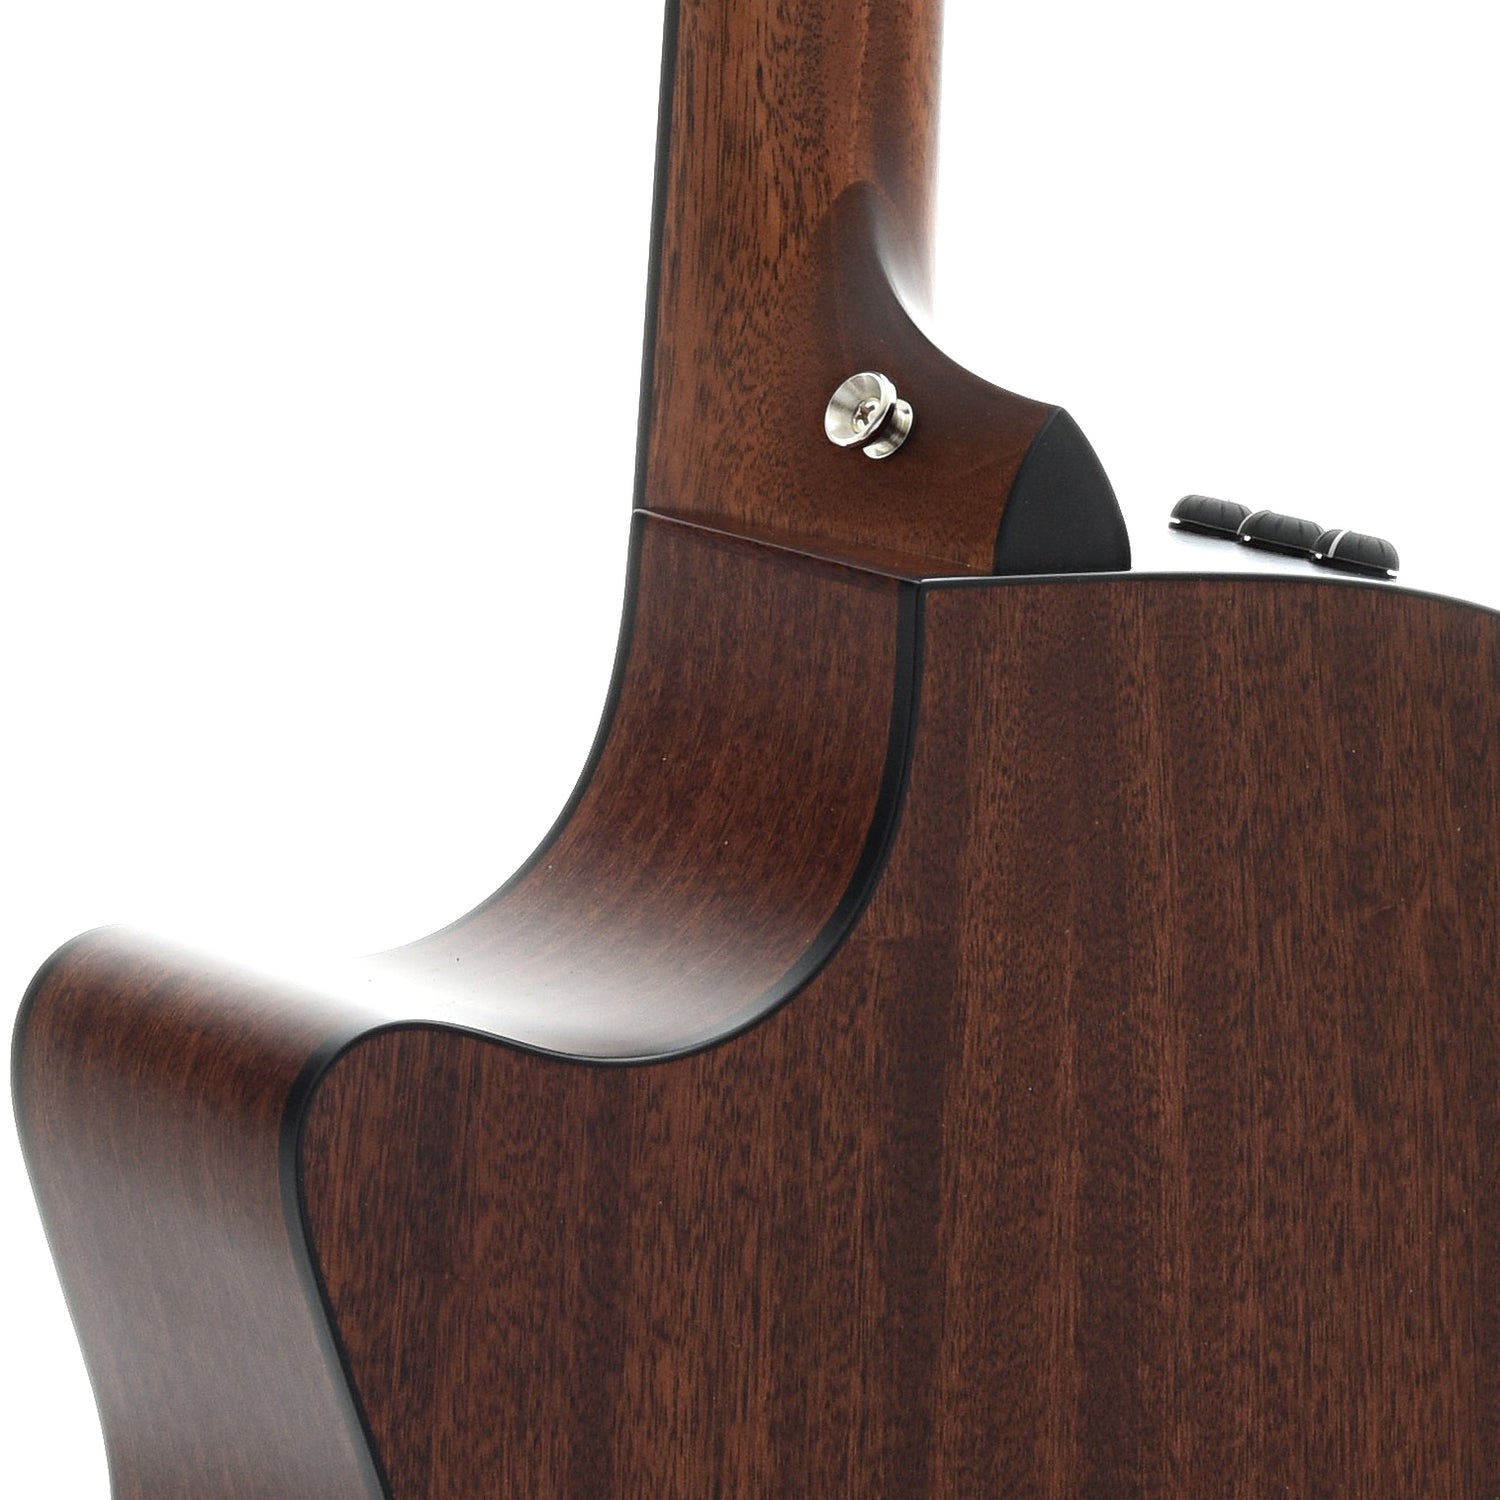 Neck Joint of Taylor 314ce Acoustic Guitar